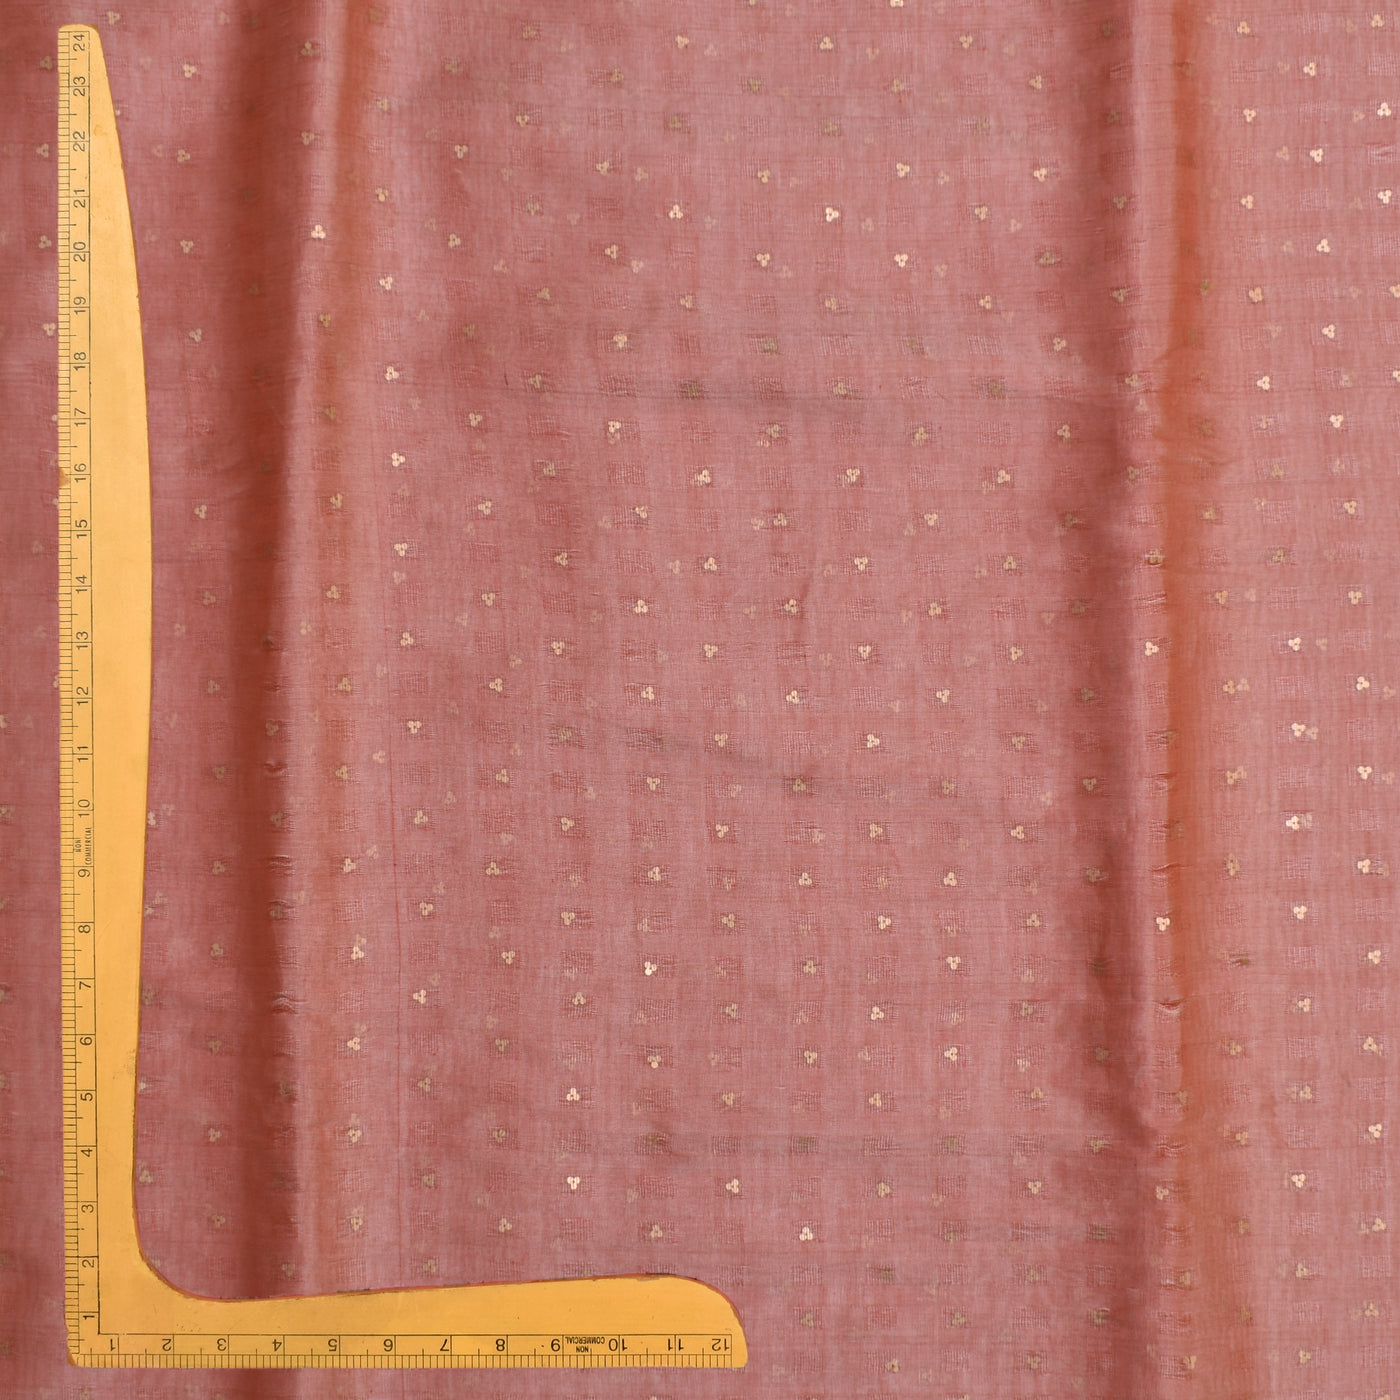 Pastel Pink Bailu Fabric with Sequins Design